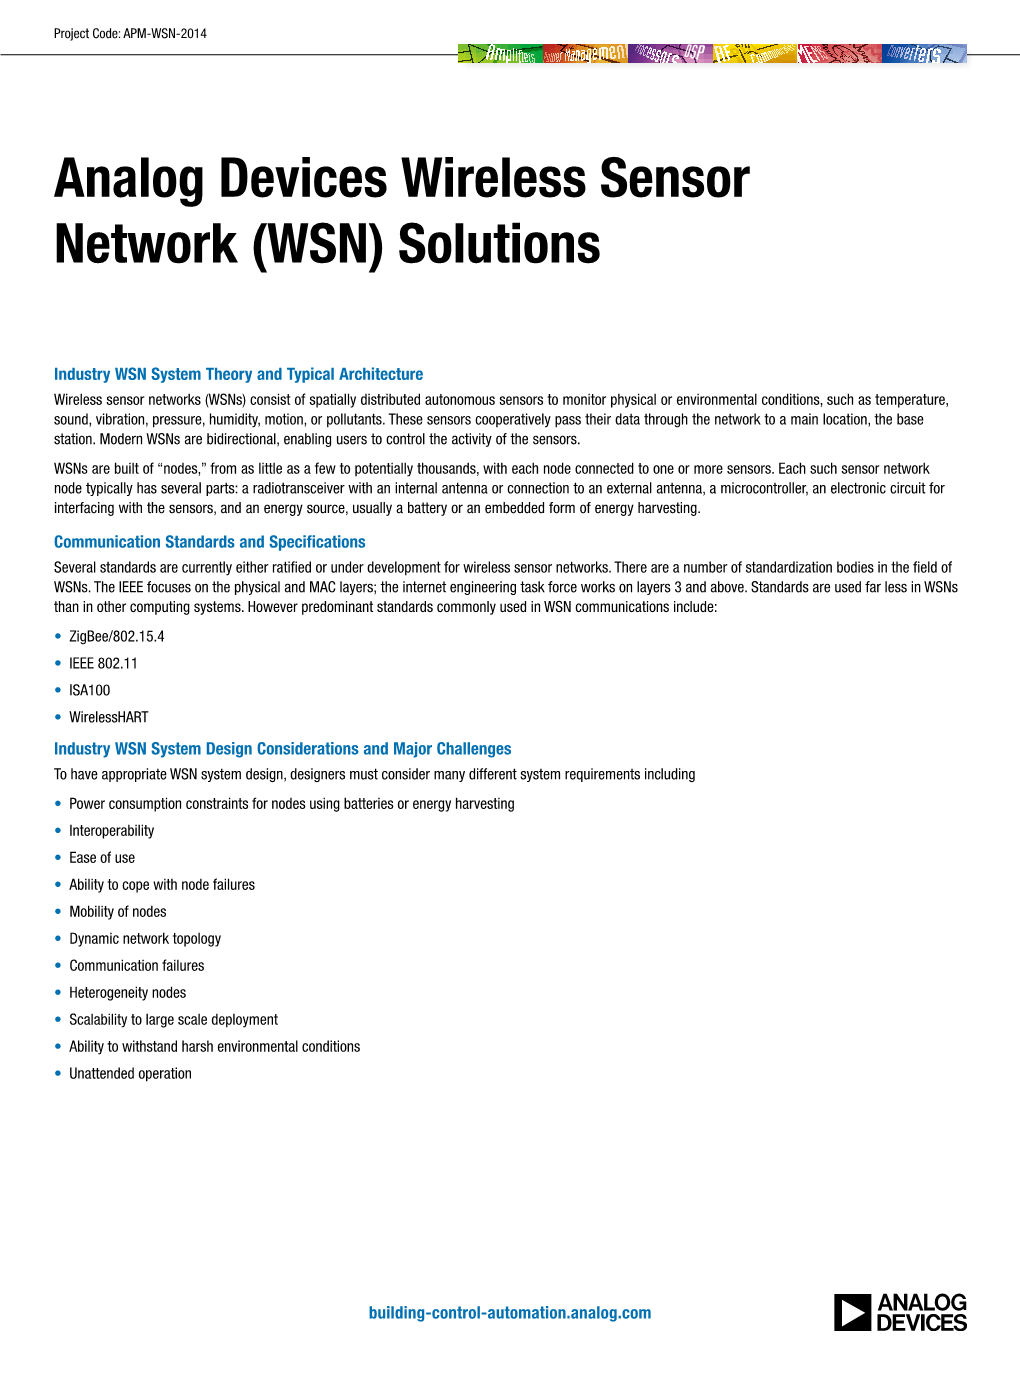 Analog Devices Wireless Sensor Network (WSN) Solutions